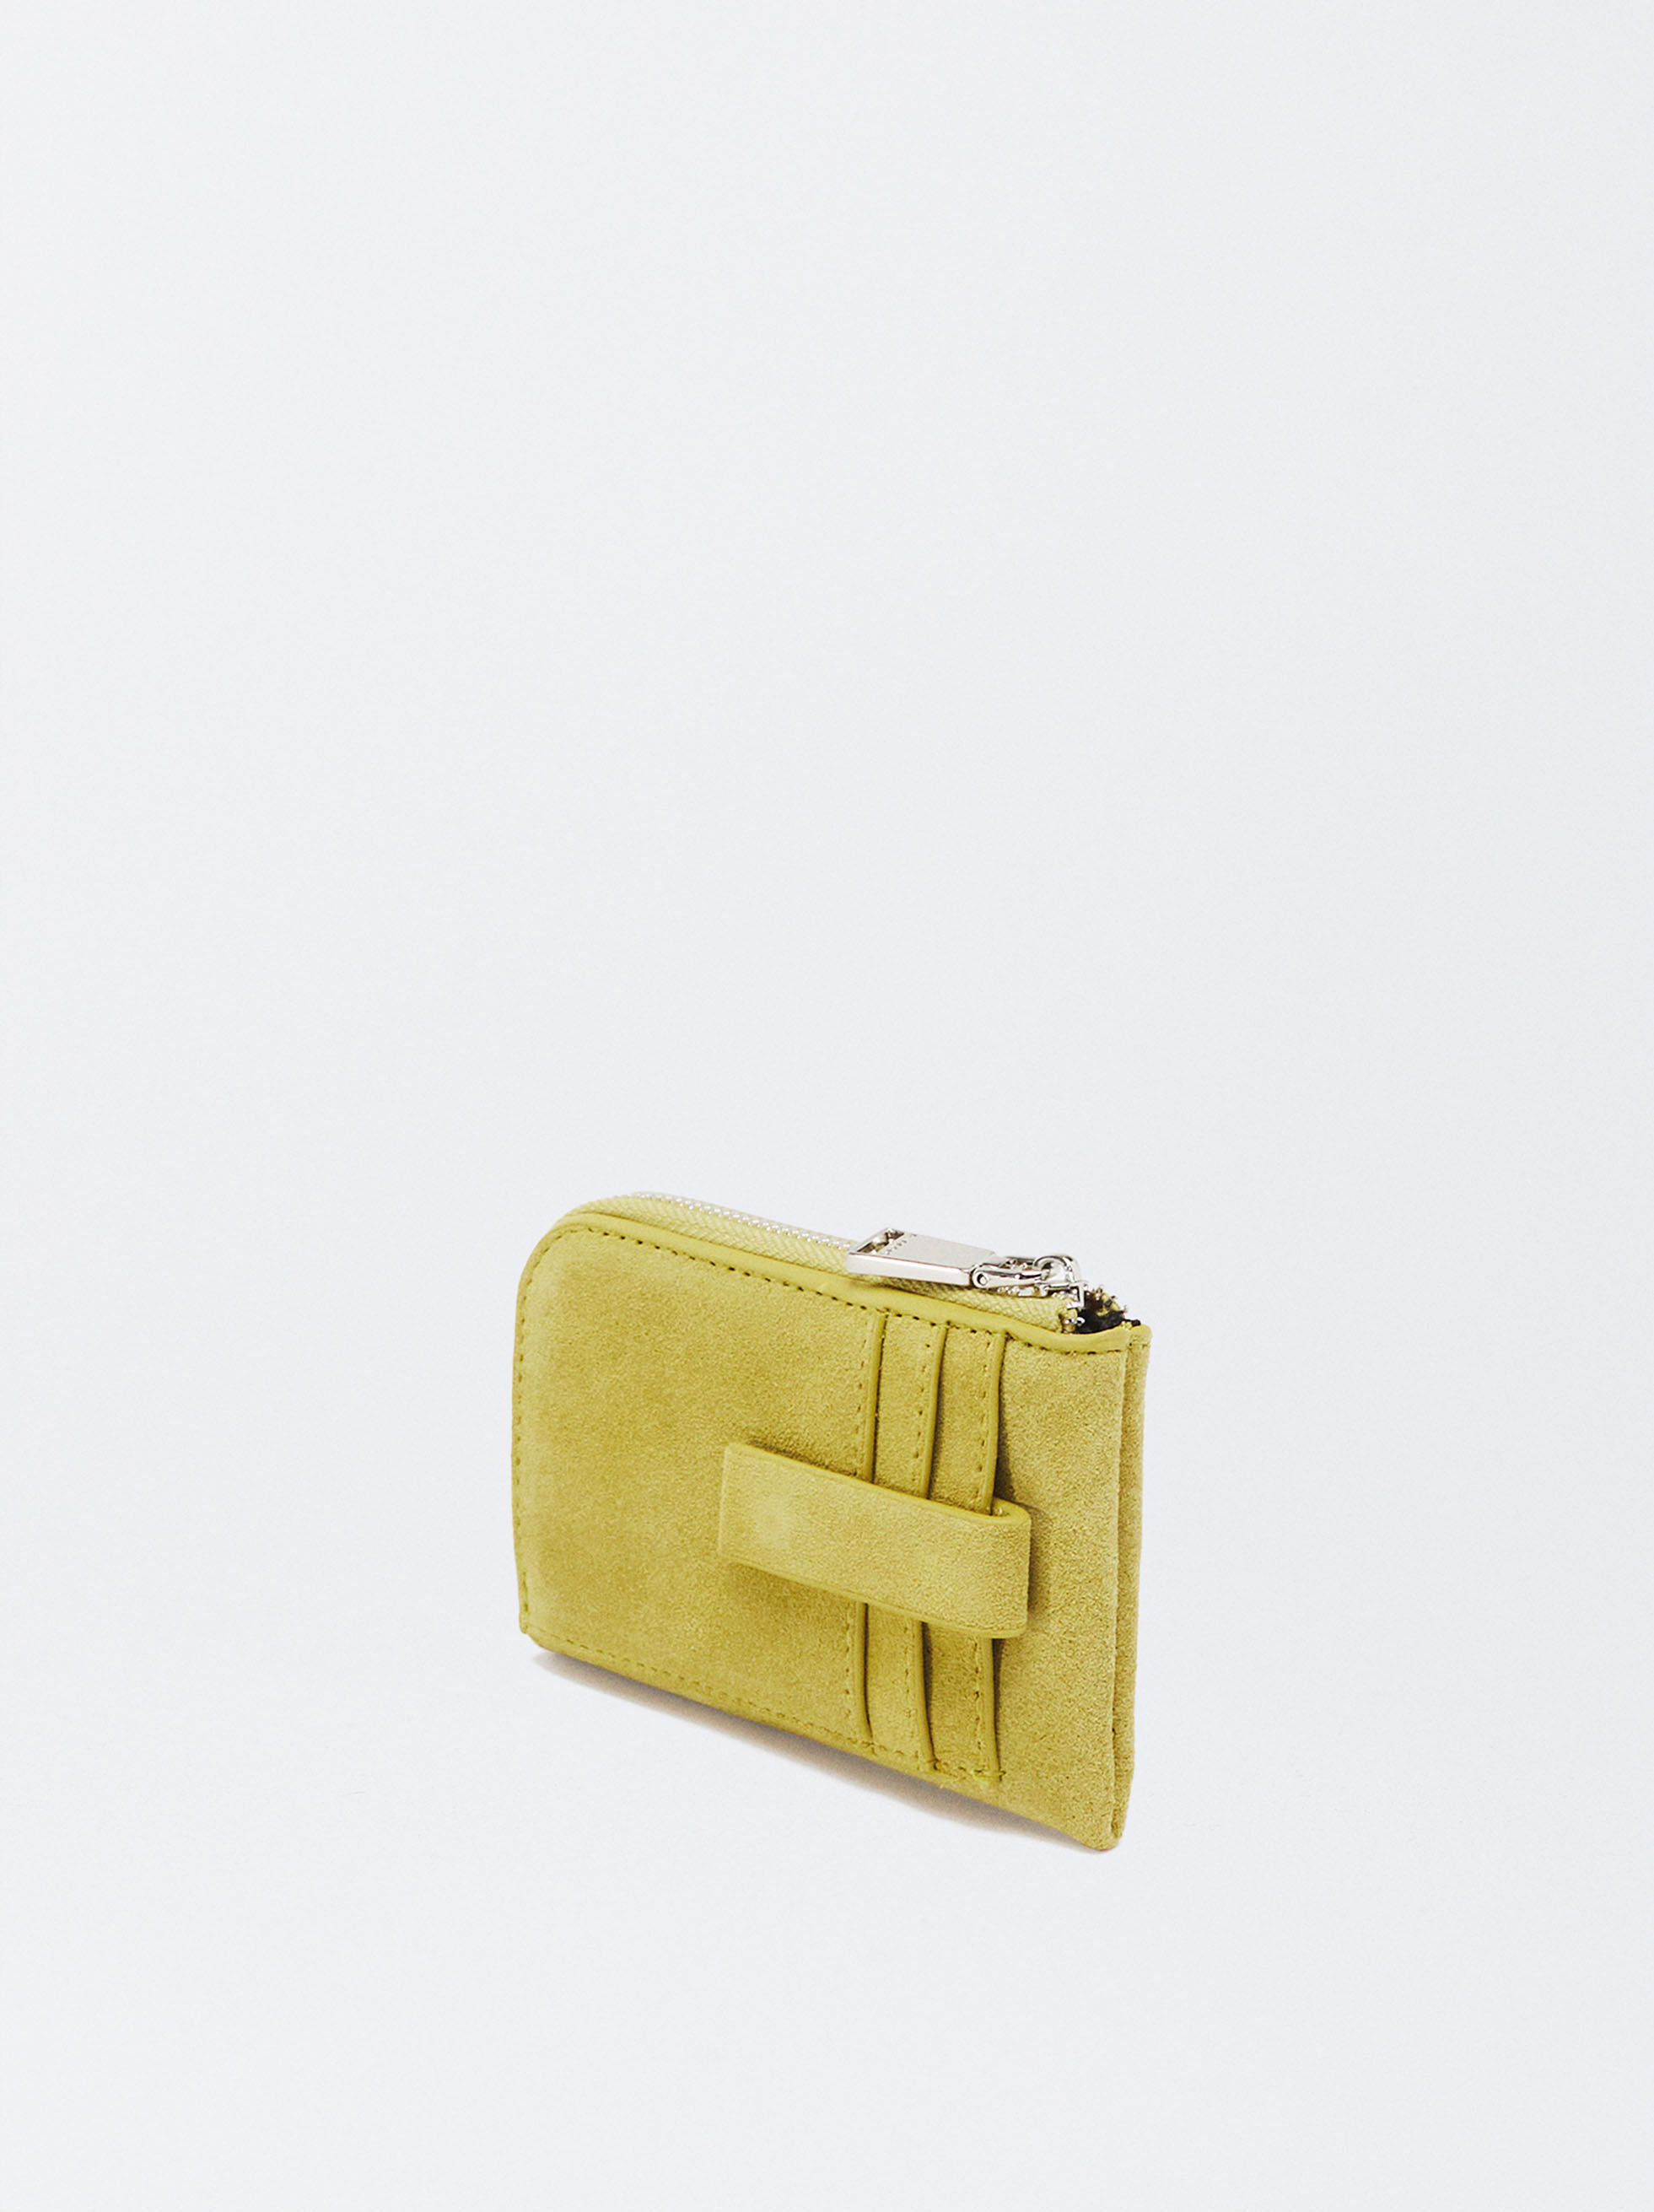 Buy Closeout Brand River Yellow Genuine Crocodile Leather Clutch Bag ,  Clutches for Women , Leather Handbag , Clutch Purse at ShopLC.